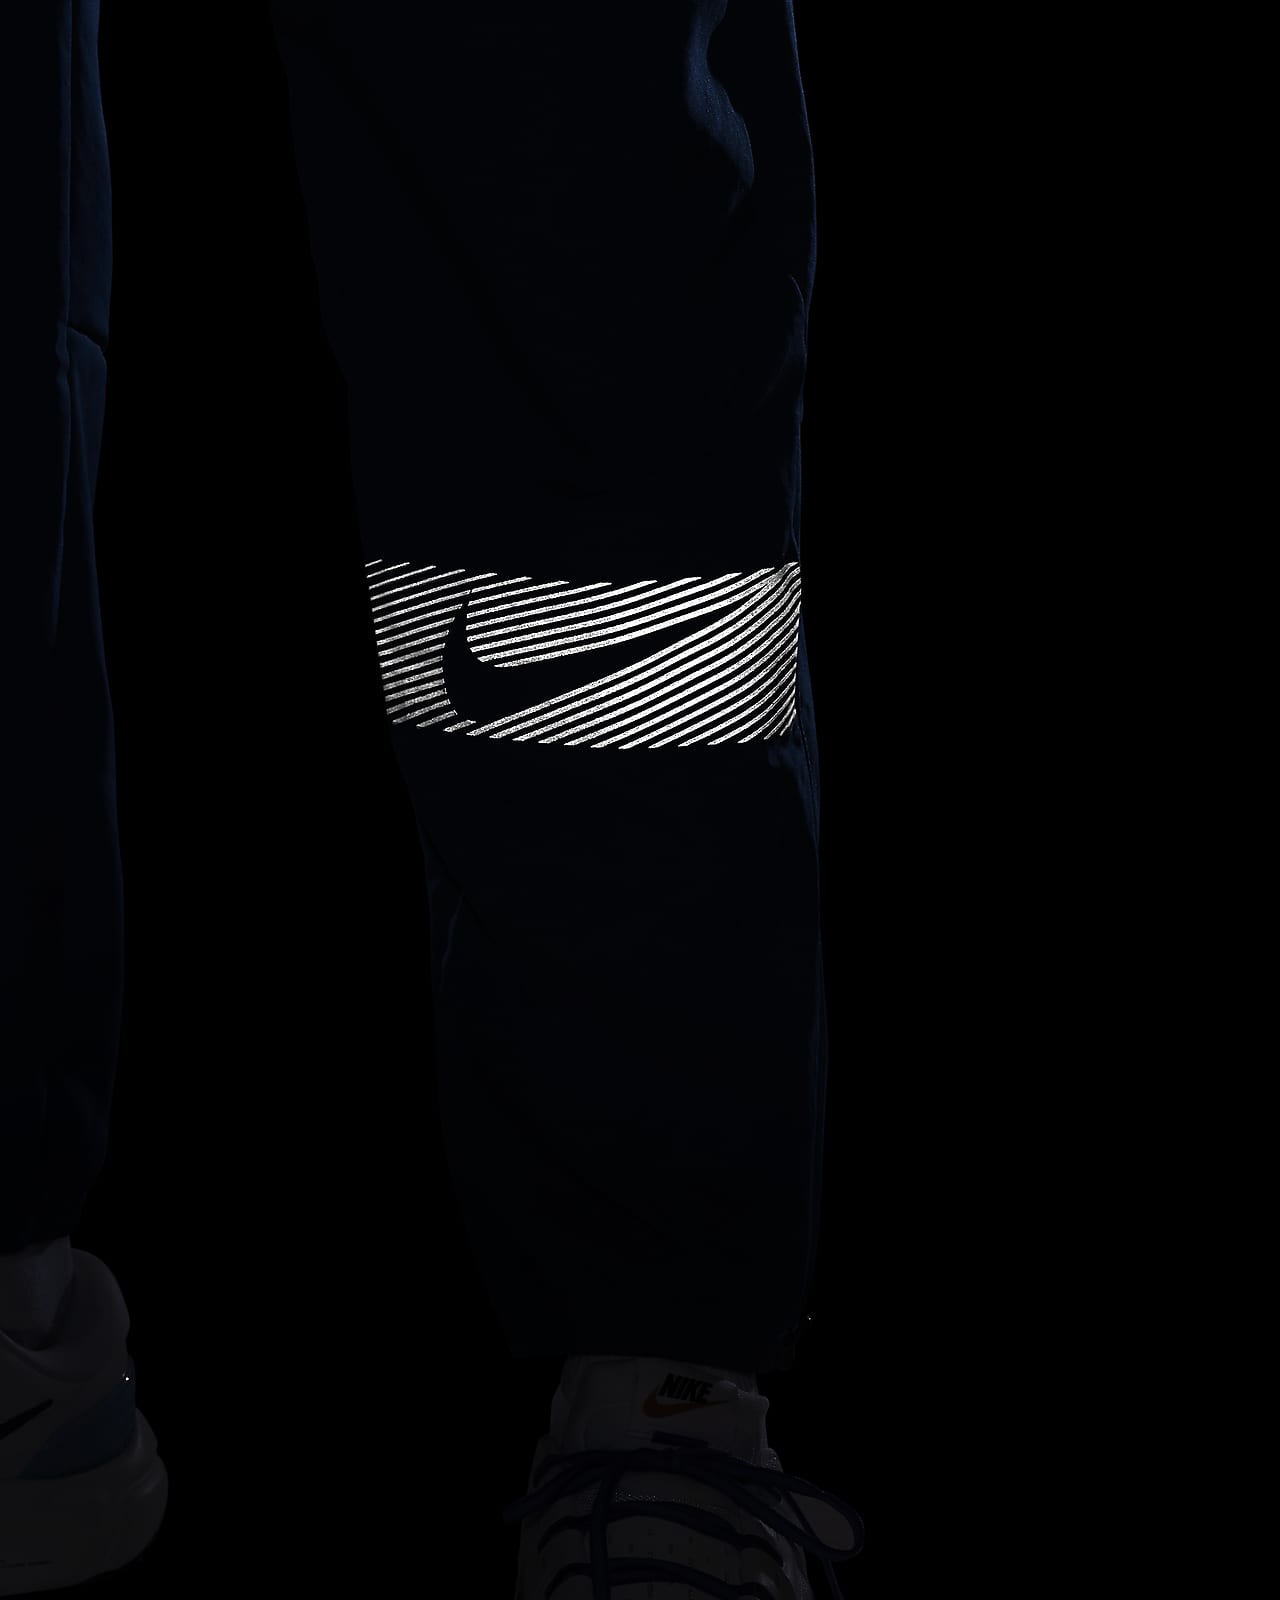  Nike Dri-FIT Challenger Men's Woven Running Pants  (Black/Reflective SILV, DD4894-010) Size Small : Clothing, Shoes & Jewelry